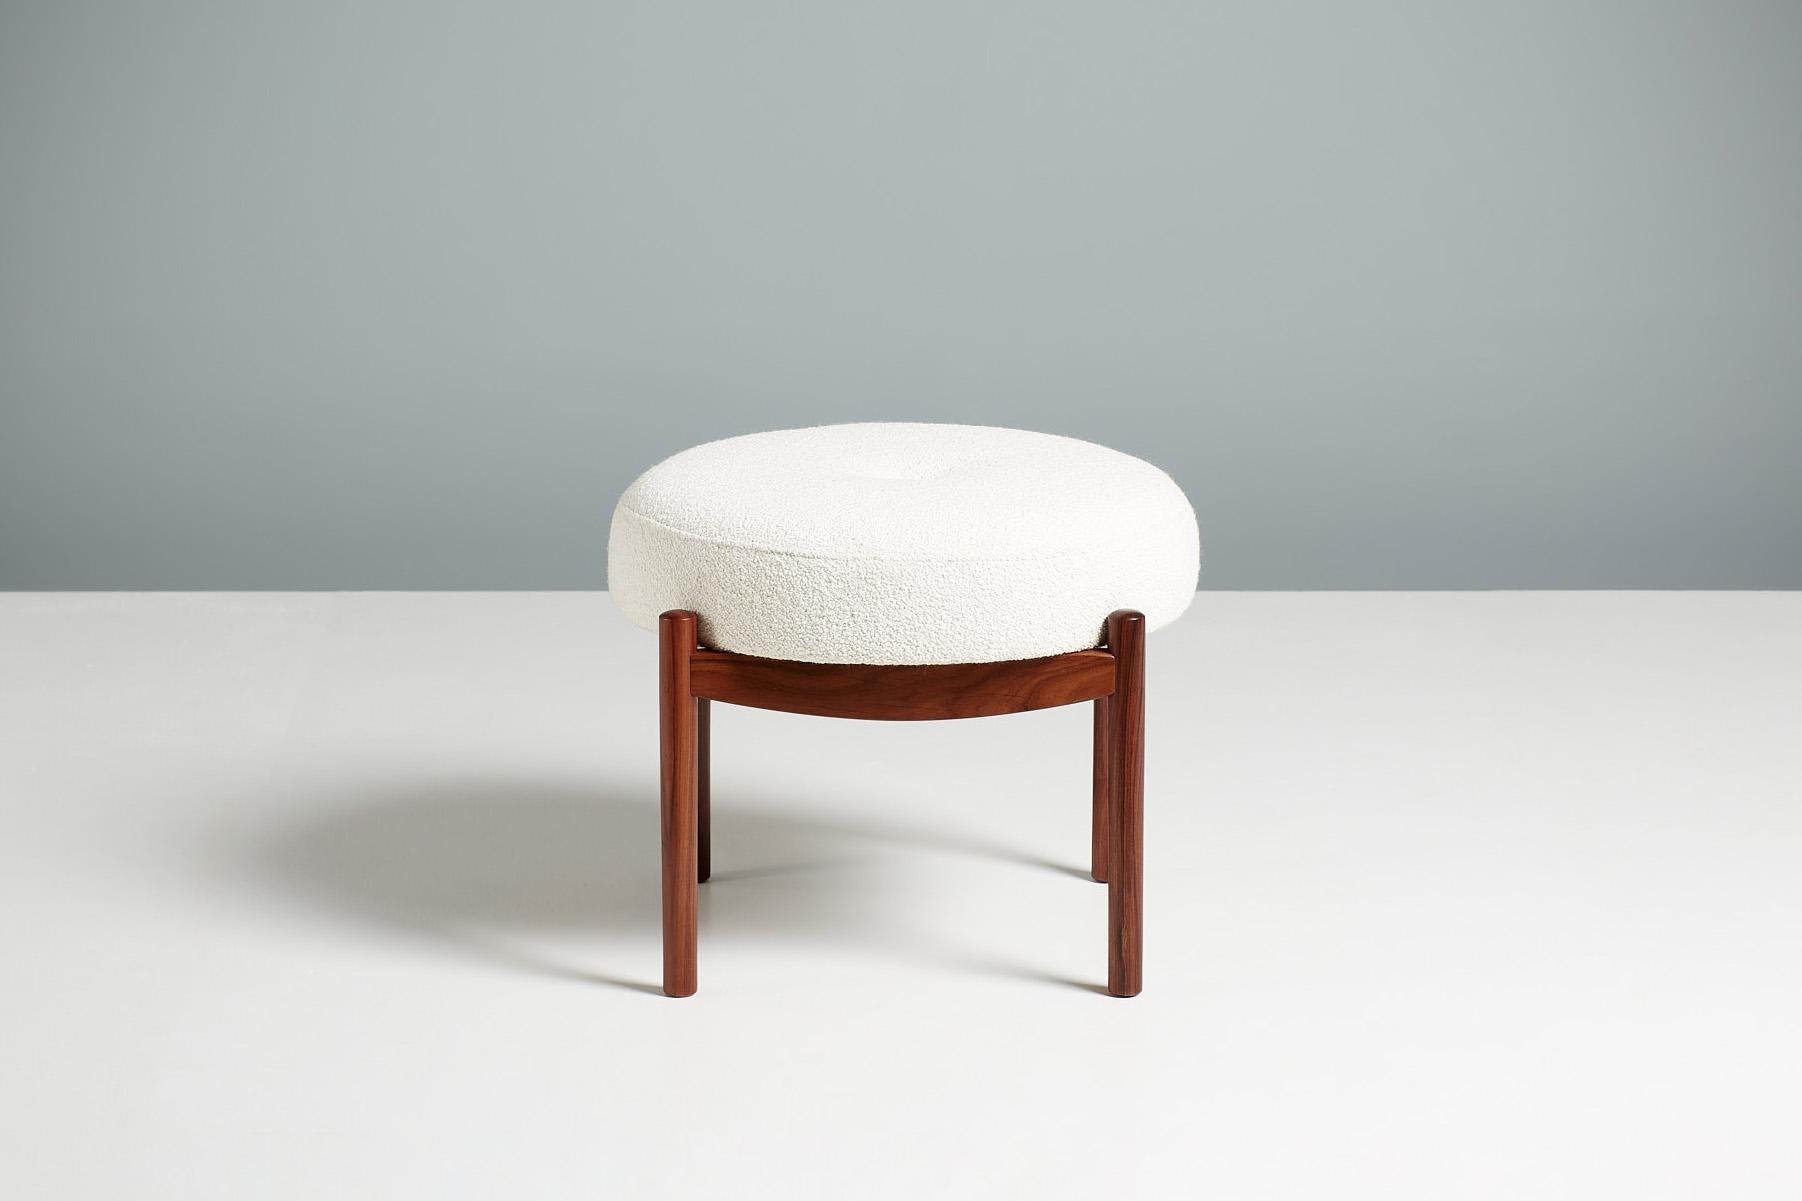 Custom made Esko Ottoman from Dagmar Design

A pair of custom-made round ottomans with luxurious Santos rosewood frames developed & produced at Dagmar's workshops in London. These examples have seats upholstered in off-white boucle fabric from